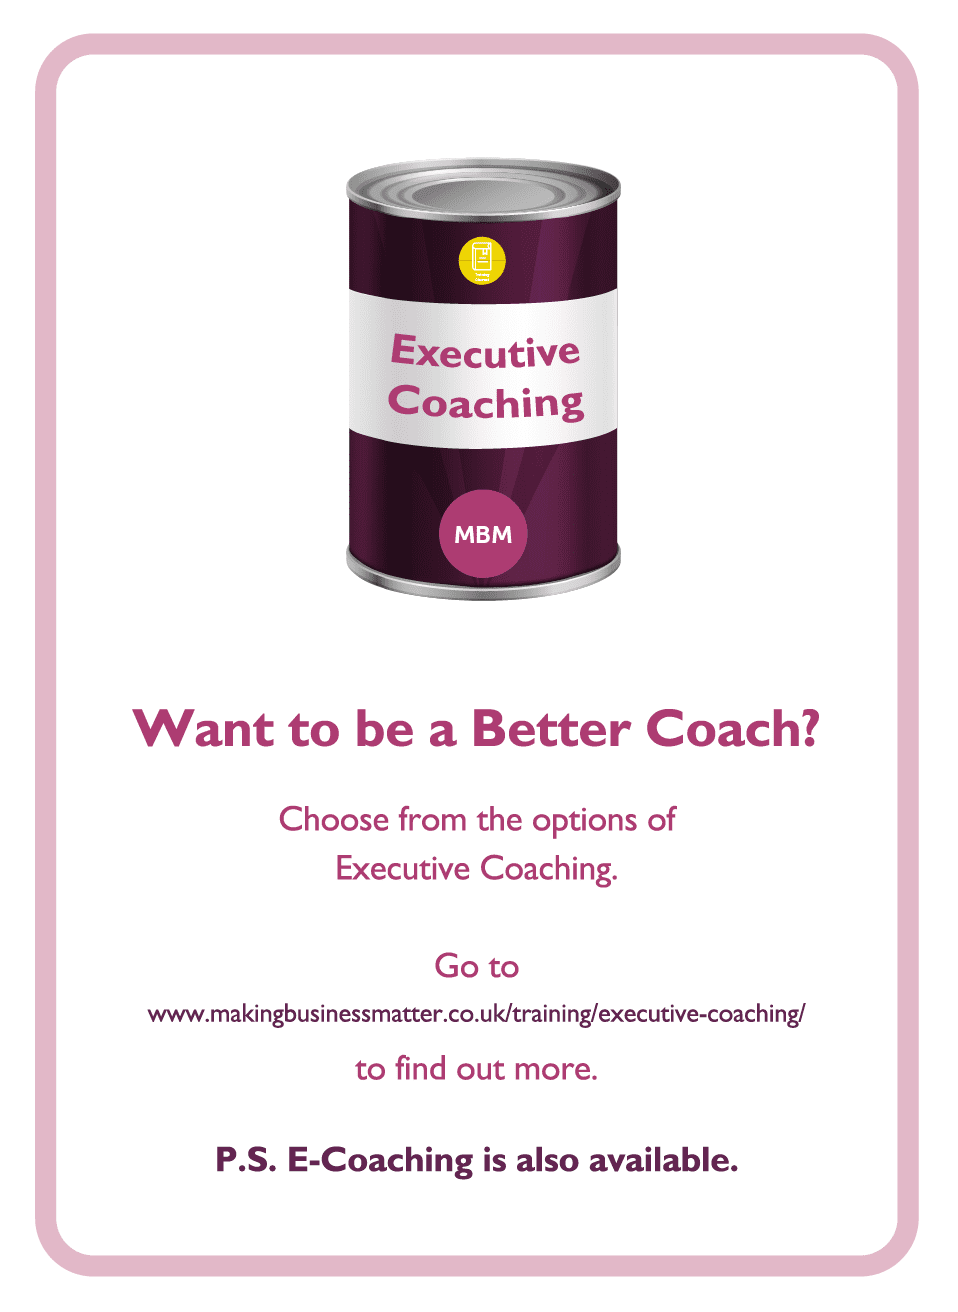 Negotiation coaching card titled want to be a better coach?